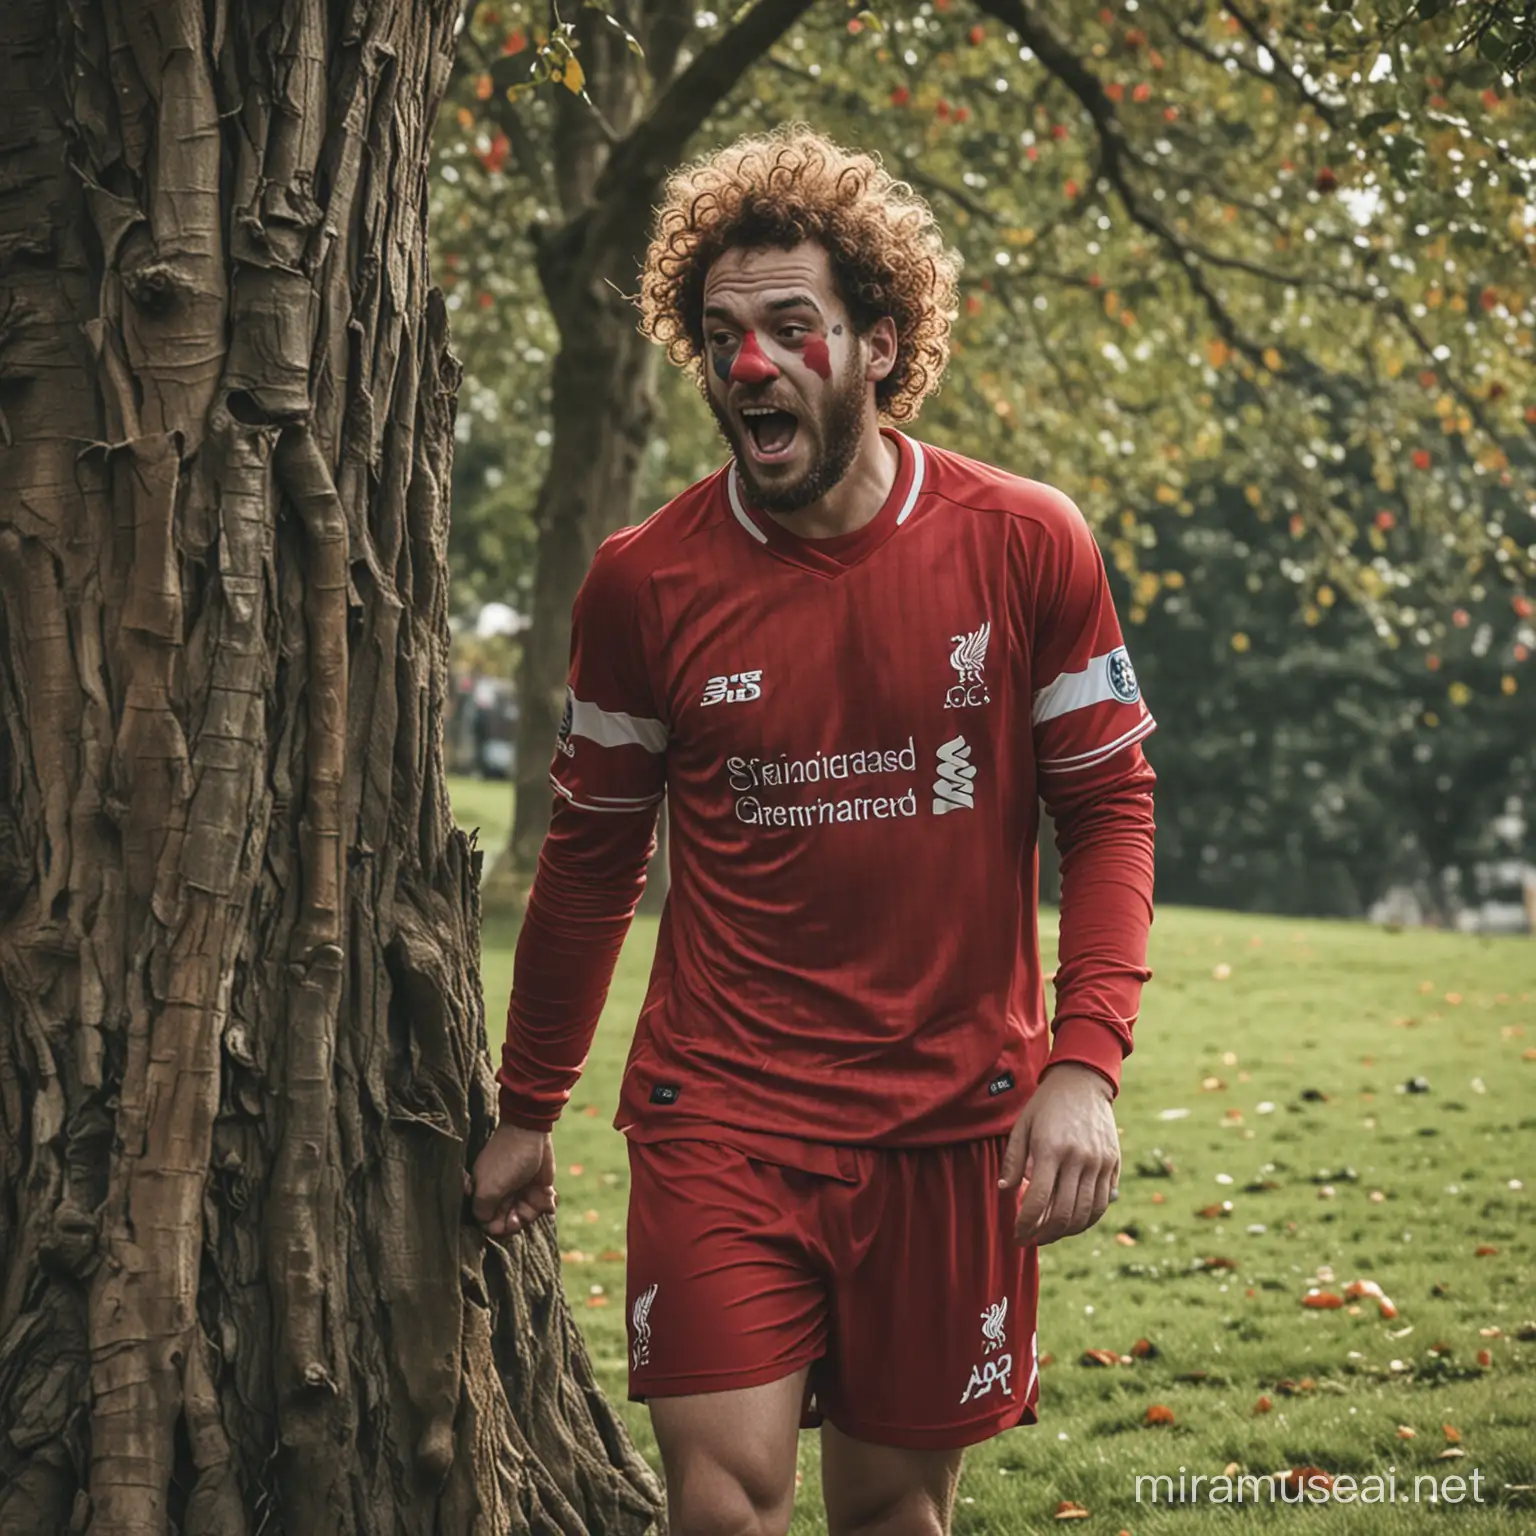 a clown-looking man with curly, flowing hair in the colors of a Liverpool jersey was seen crying loudly under a tree.
several men wearing other club jerseys laughed at him in the distan